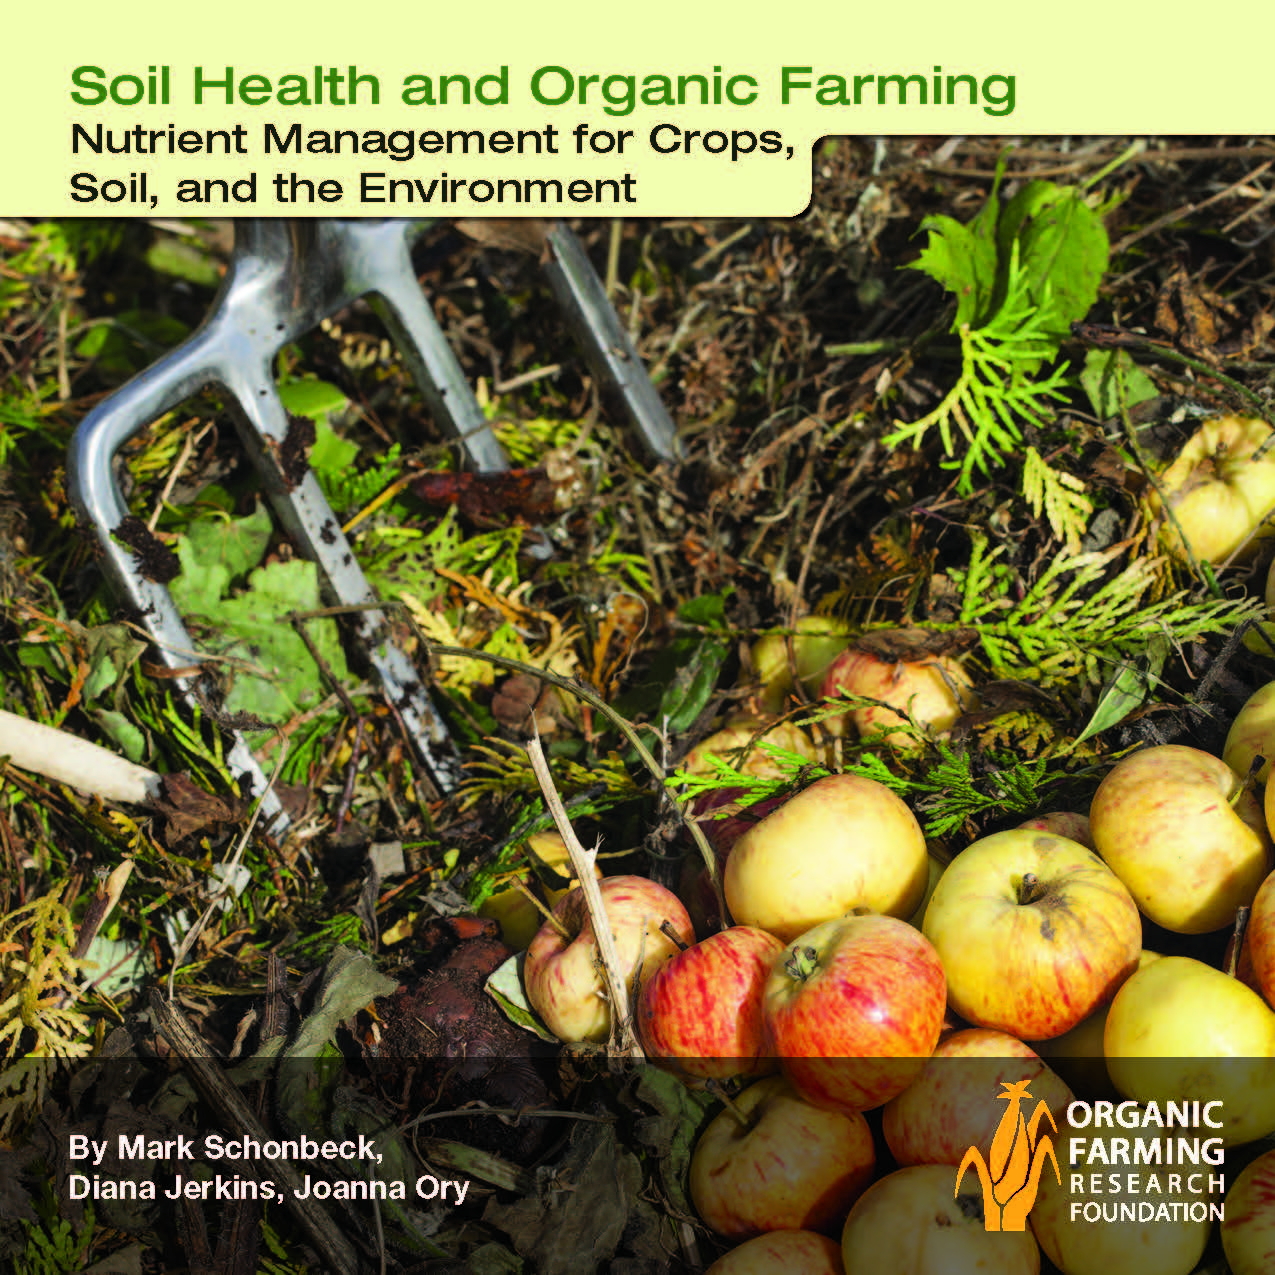 OFRF-Soil Health and Organic Farming: Nutrient Management for Crops, Soil and the Environment